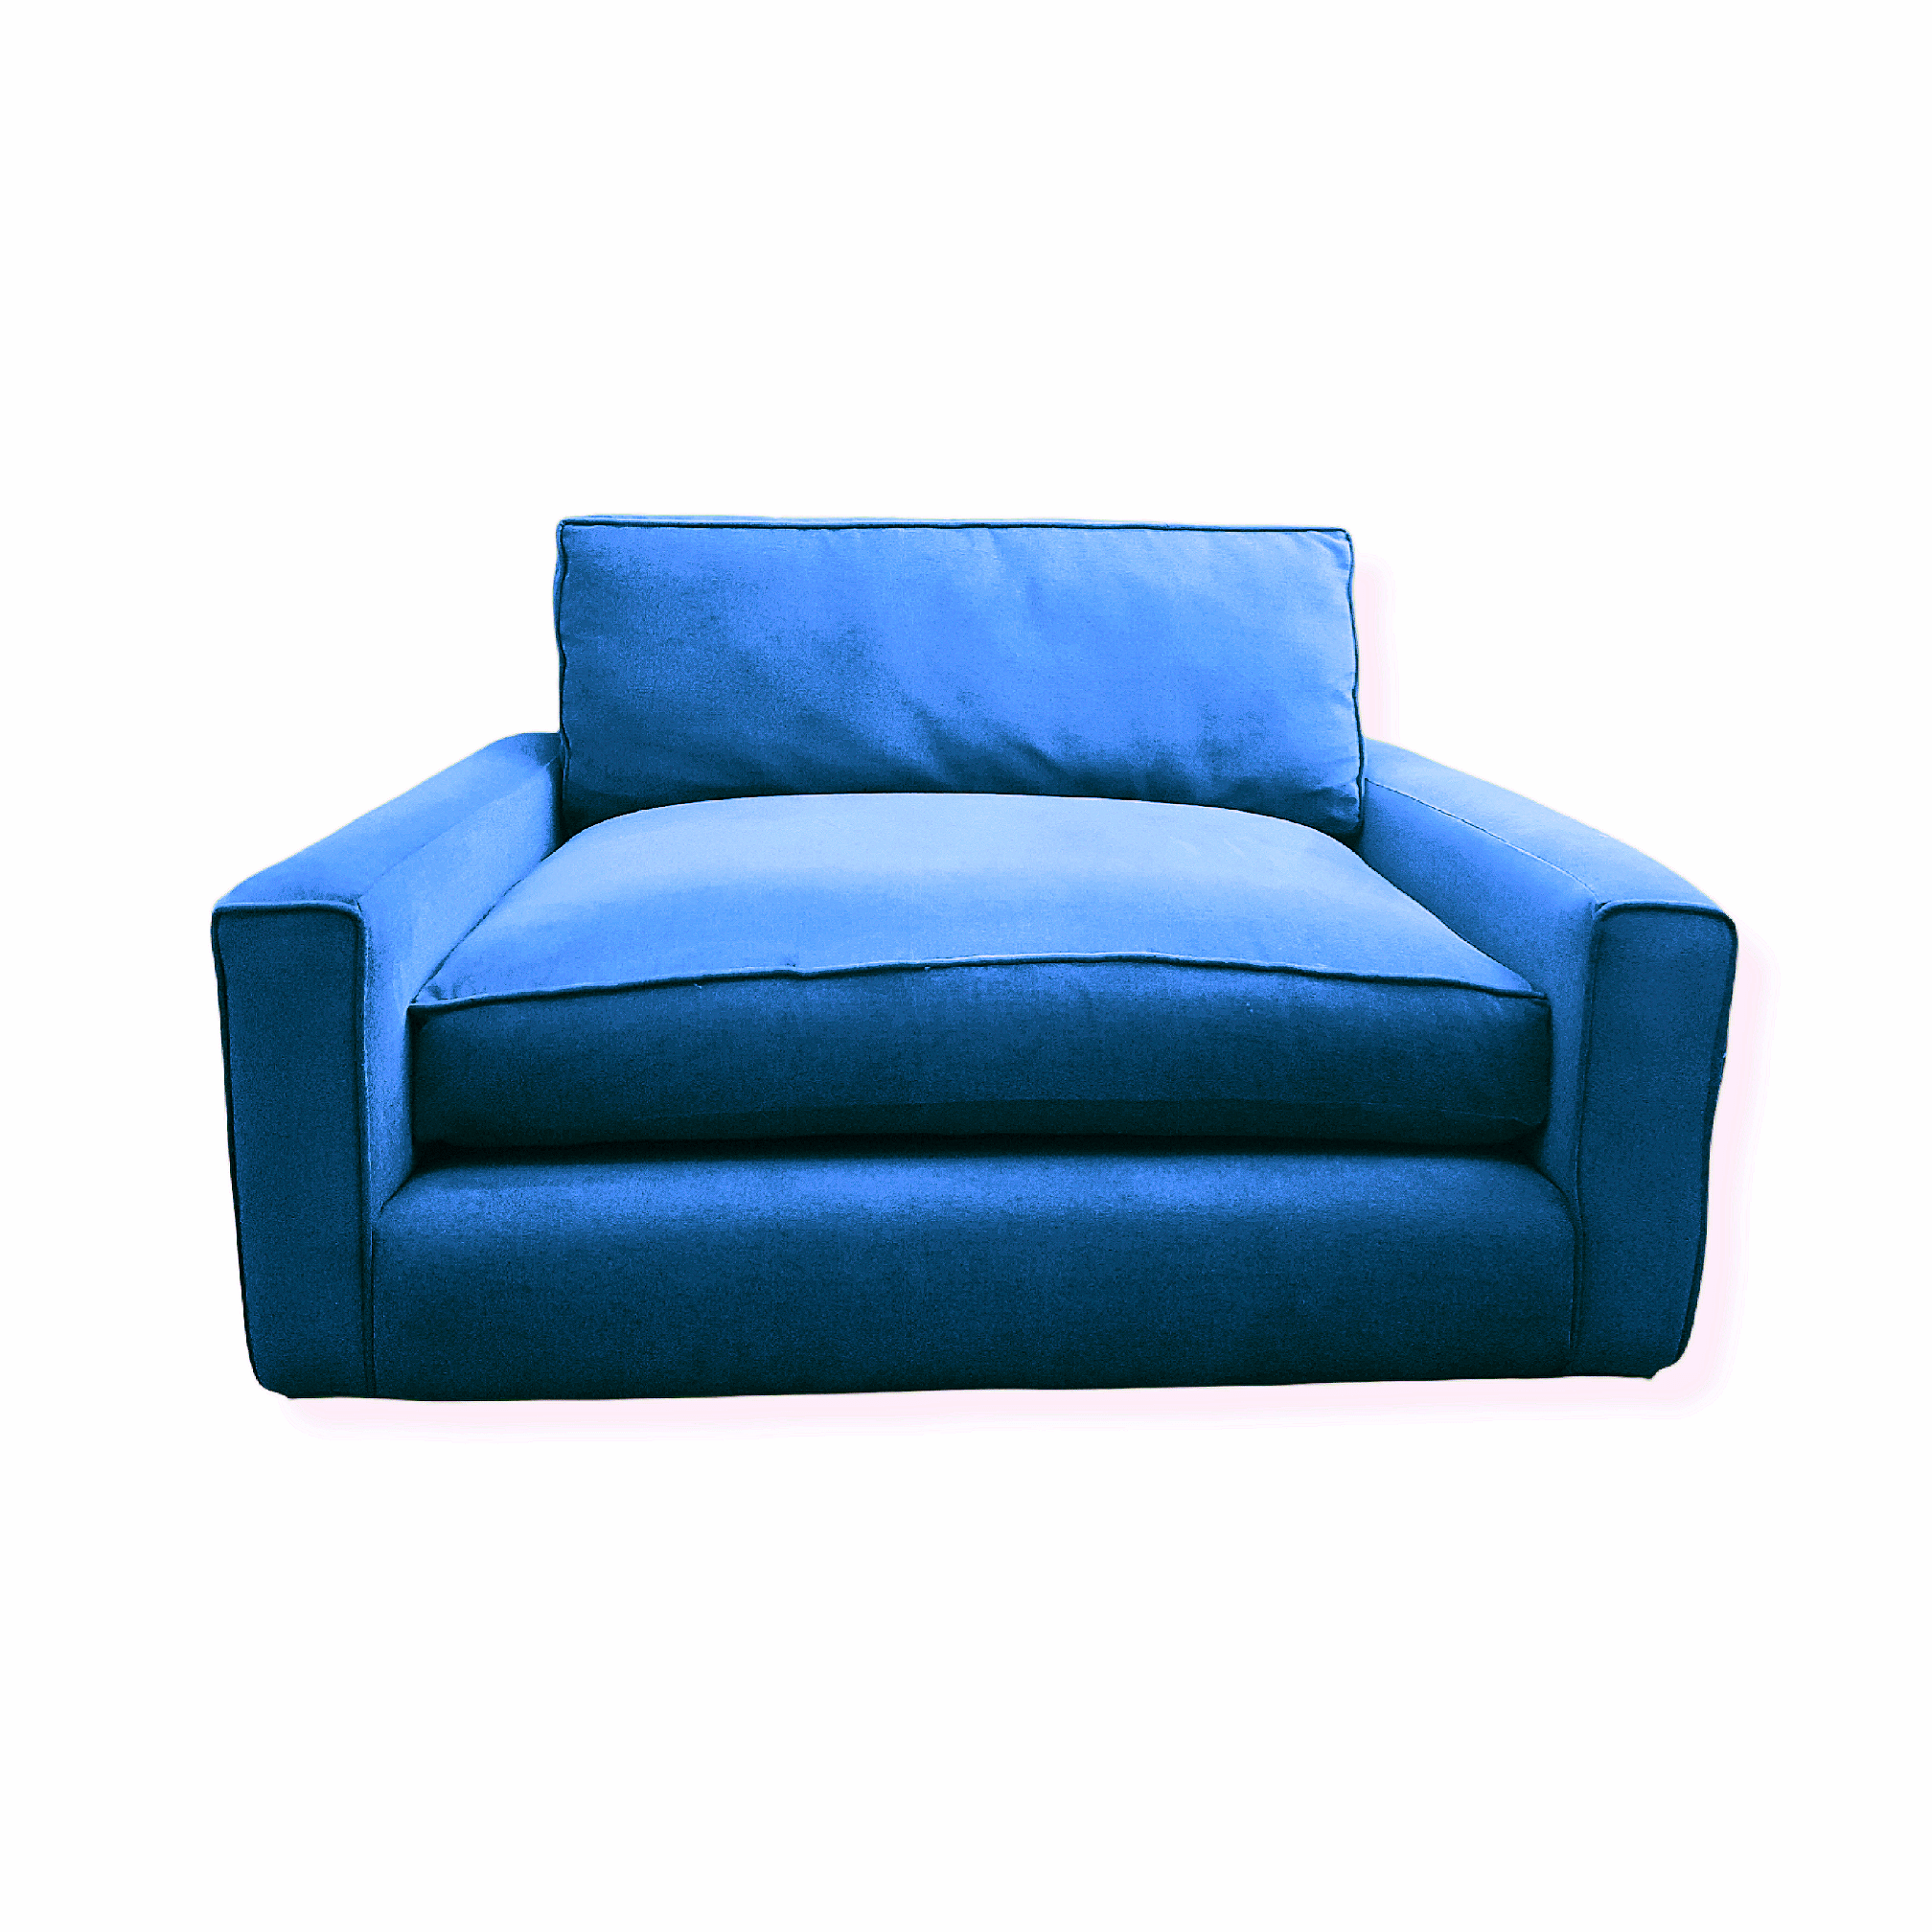 Dundee Sofa - Constantine Upholstery